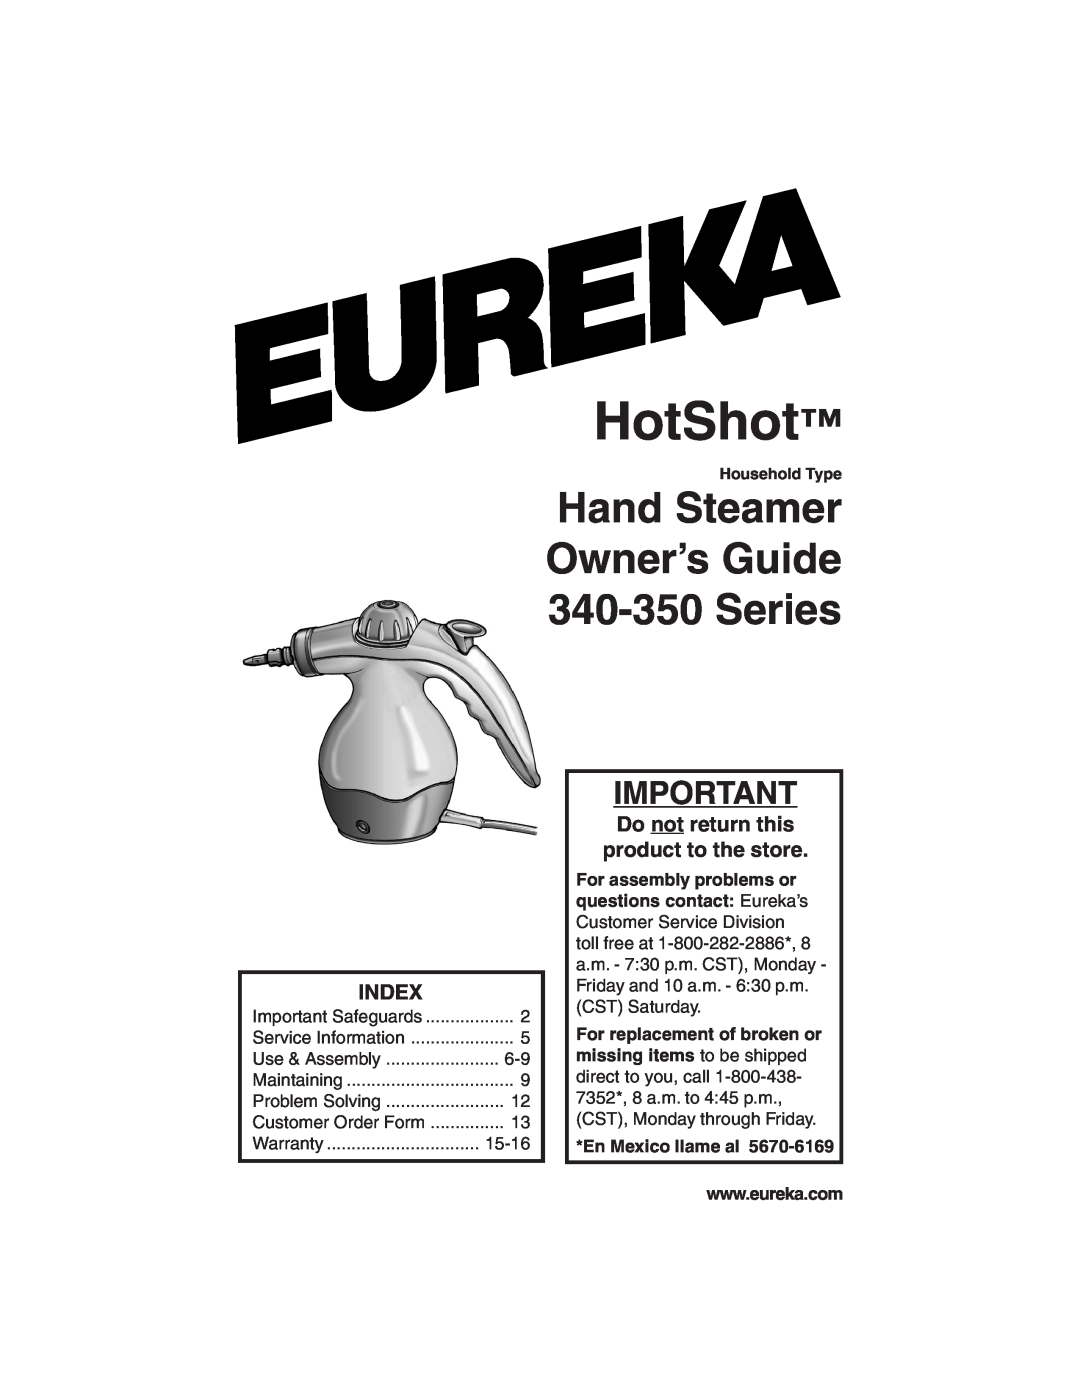 Eureka warranty Index, Do not return this product to the store, HotShot, Hand Steamer Owner’s Guide 340-350 Series 